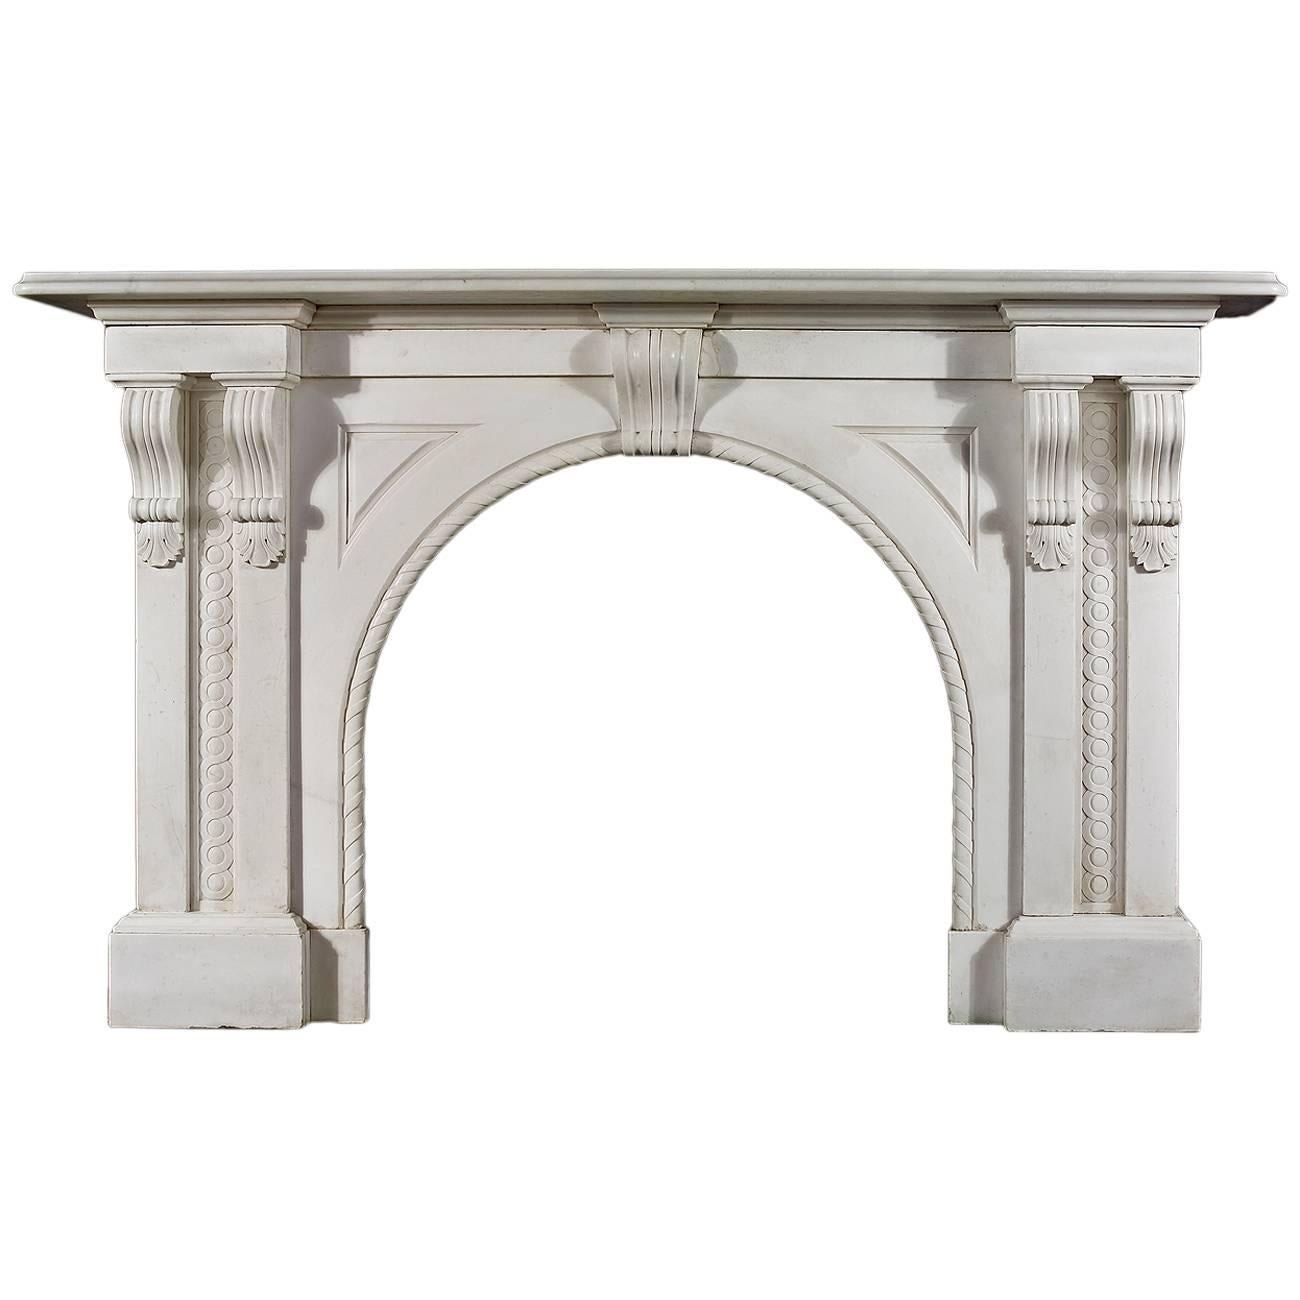 Antique White Statuary Marble Victorian Arched Fireplace Mantel For Sale